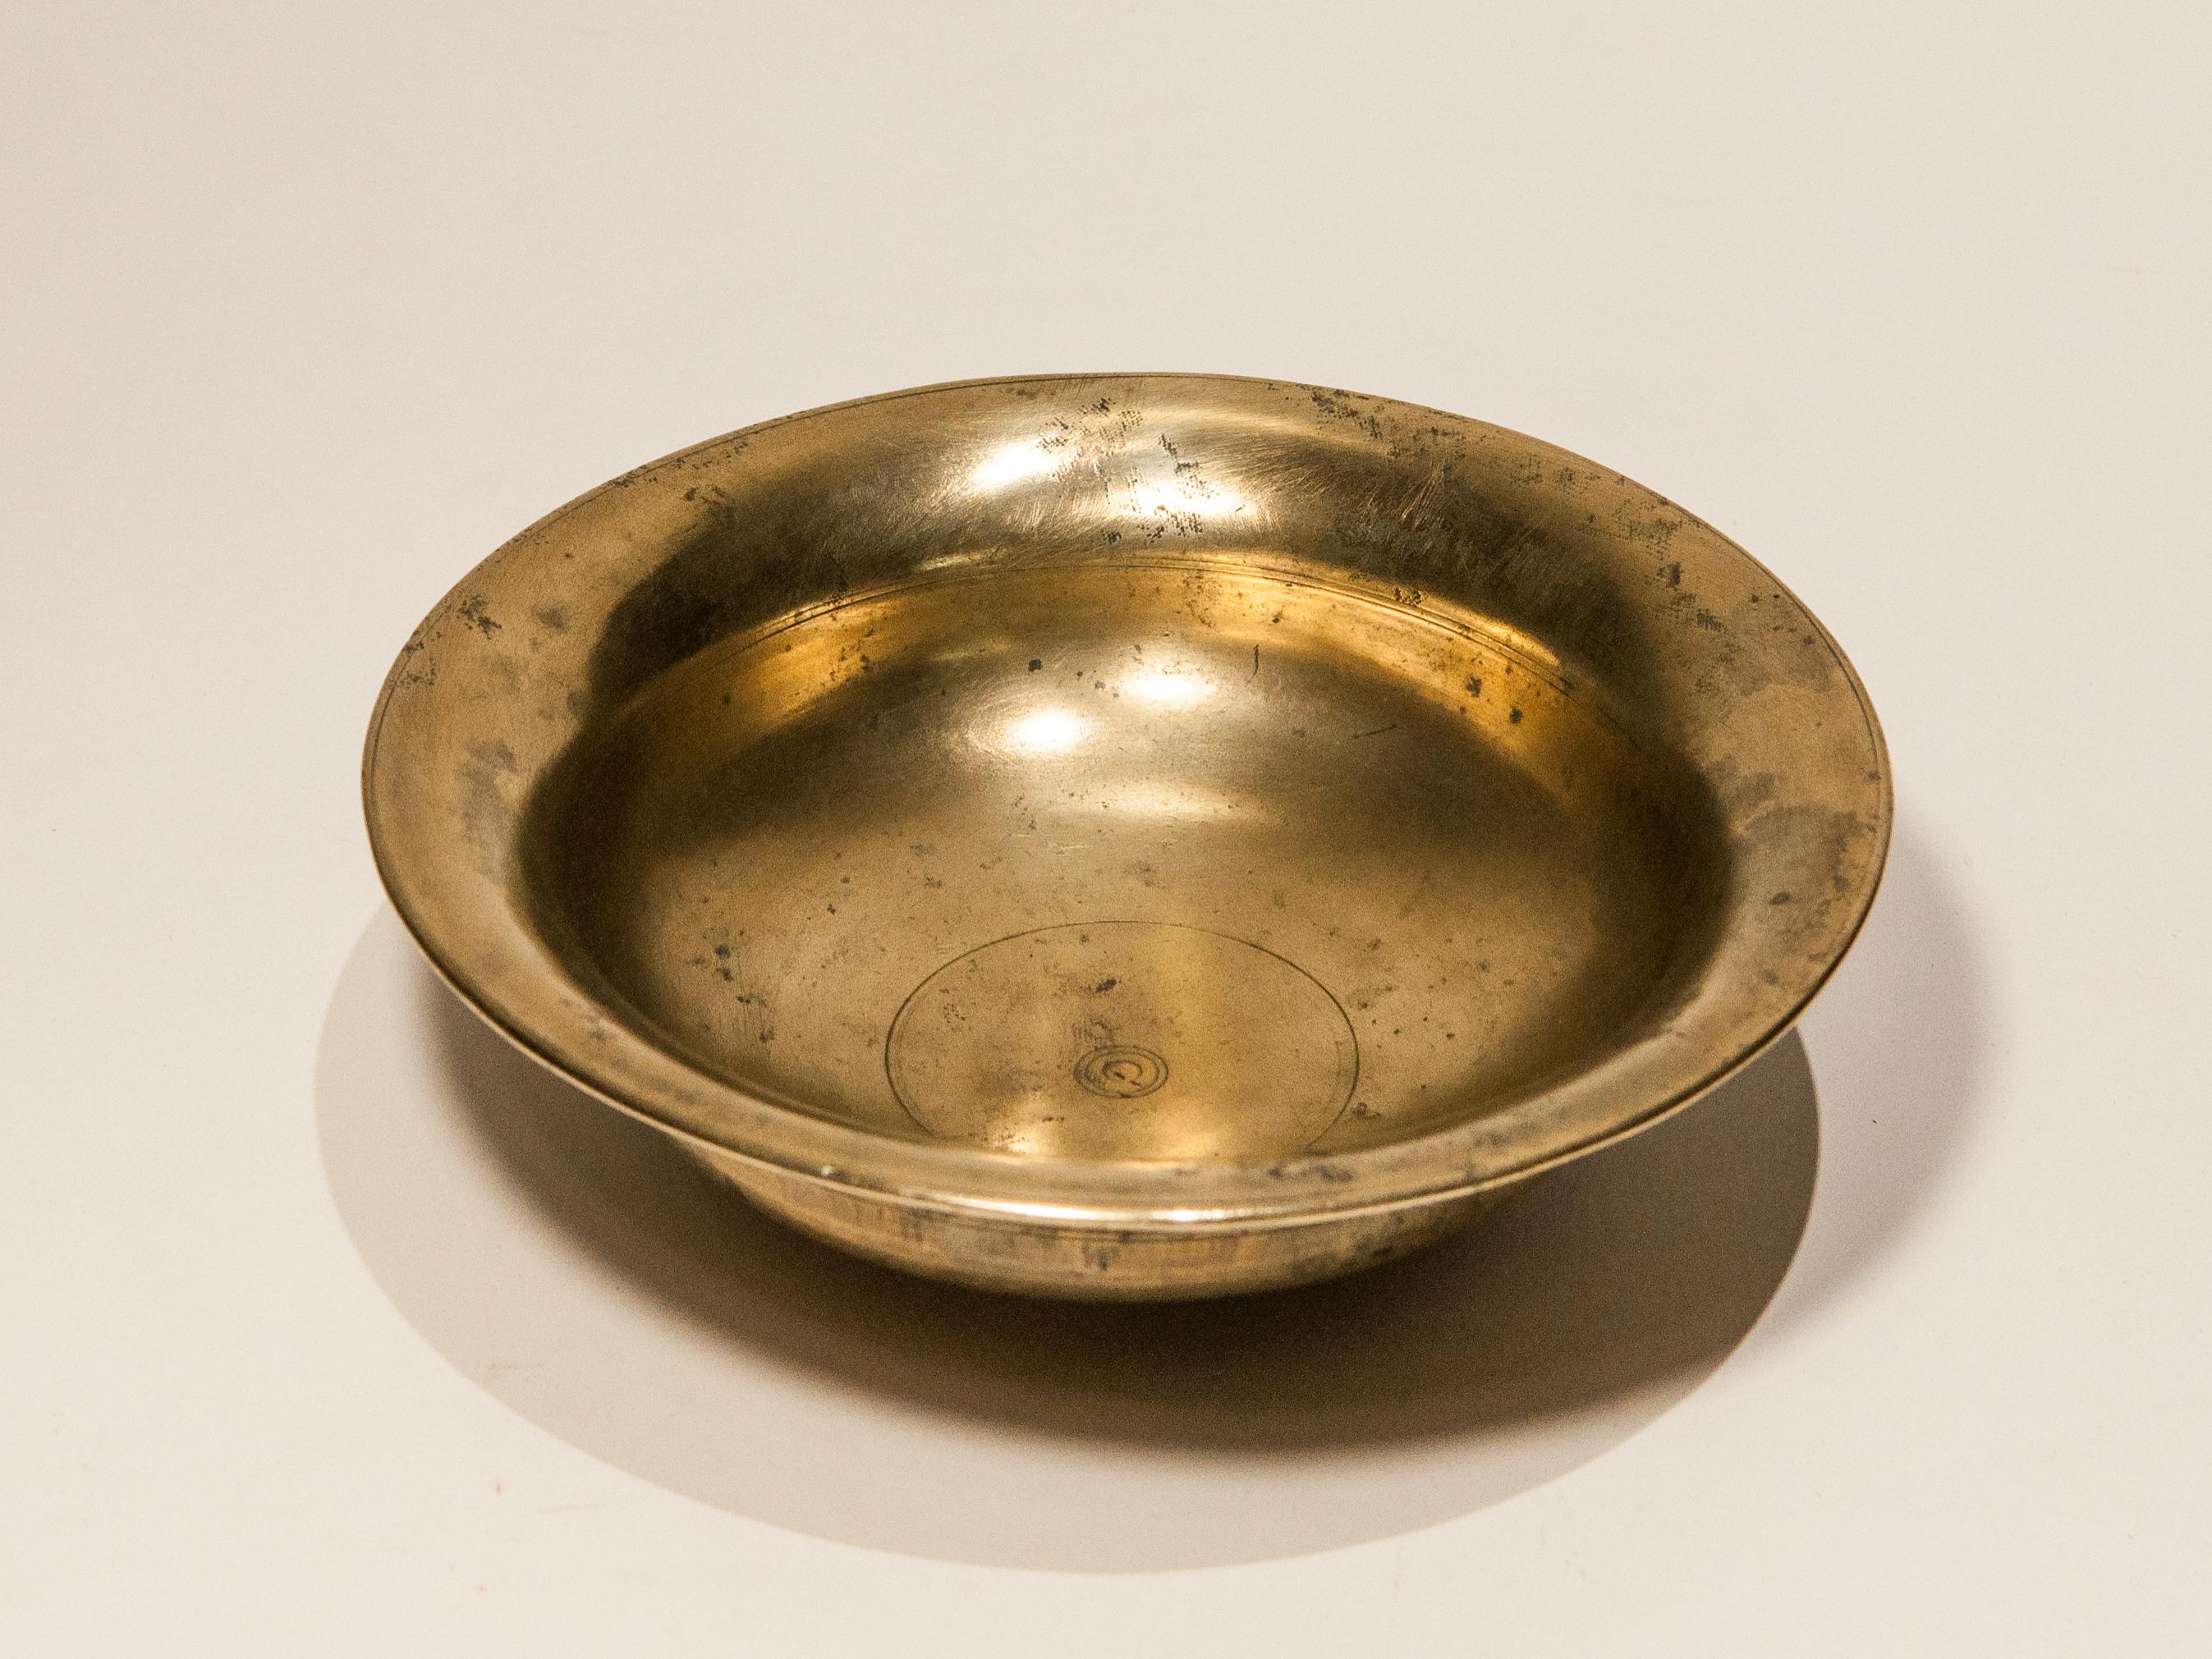 Hand-Crafted Vintage Tibetan Tsampa Bowl, Bronze, Tibet, Early to Mid-20th Century